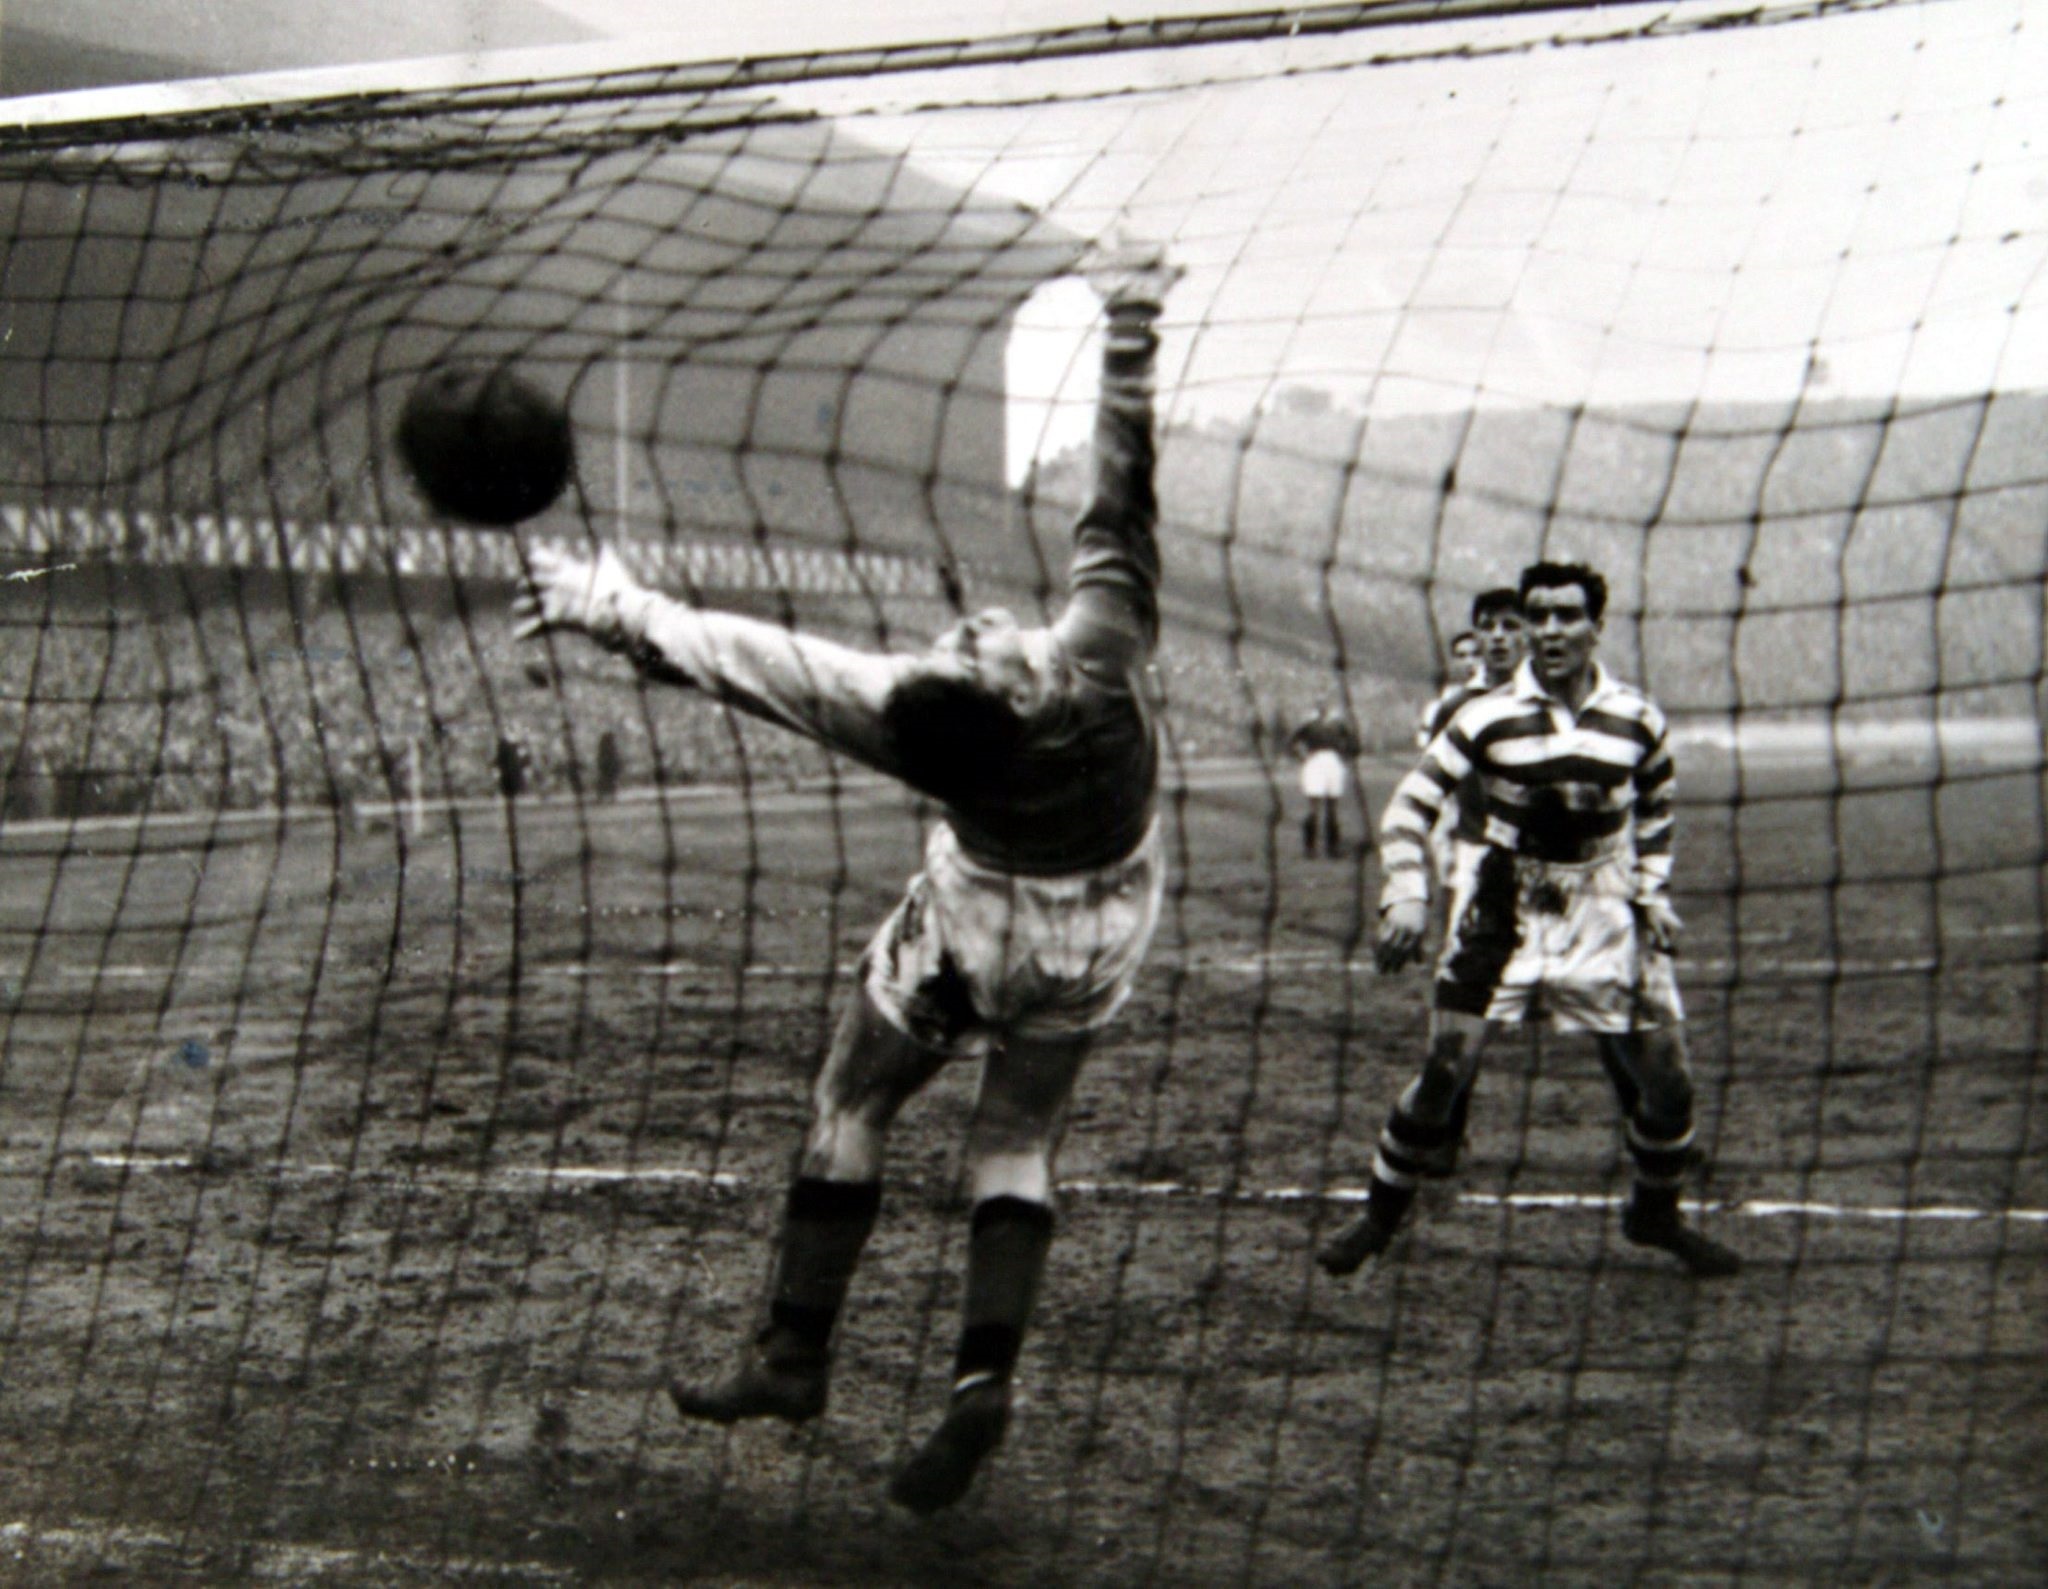 When Glasgow Celtic legend Neilly Mochan scored more than 100 goals for the club